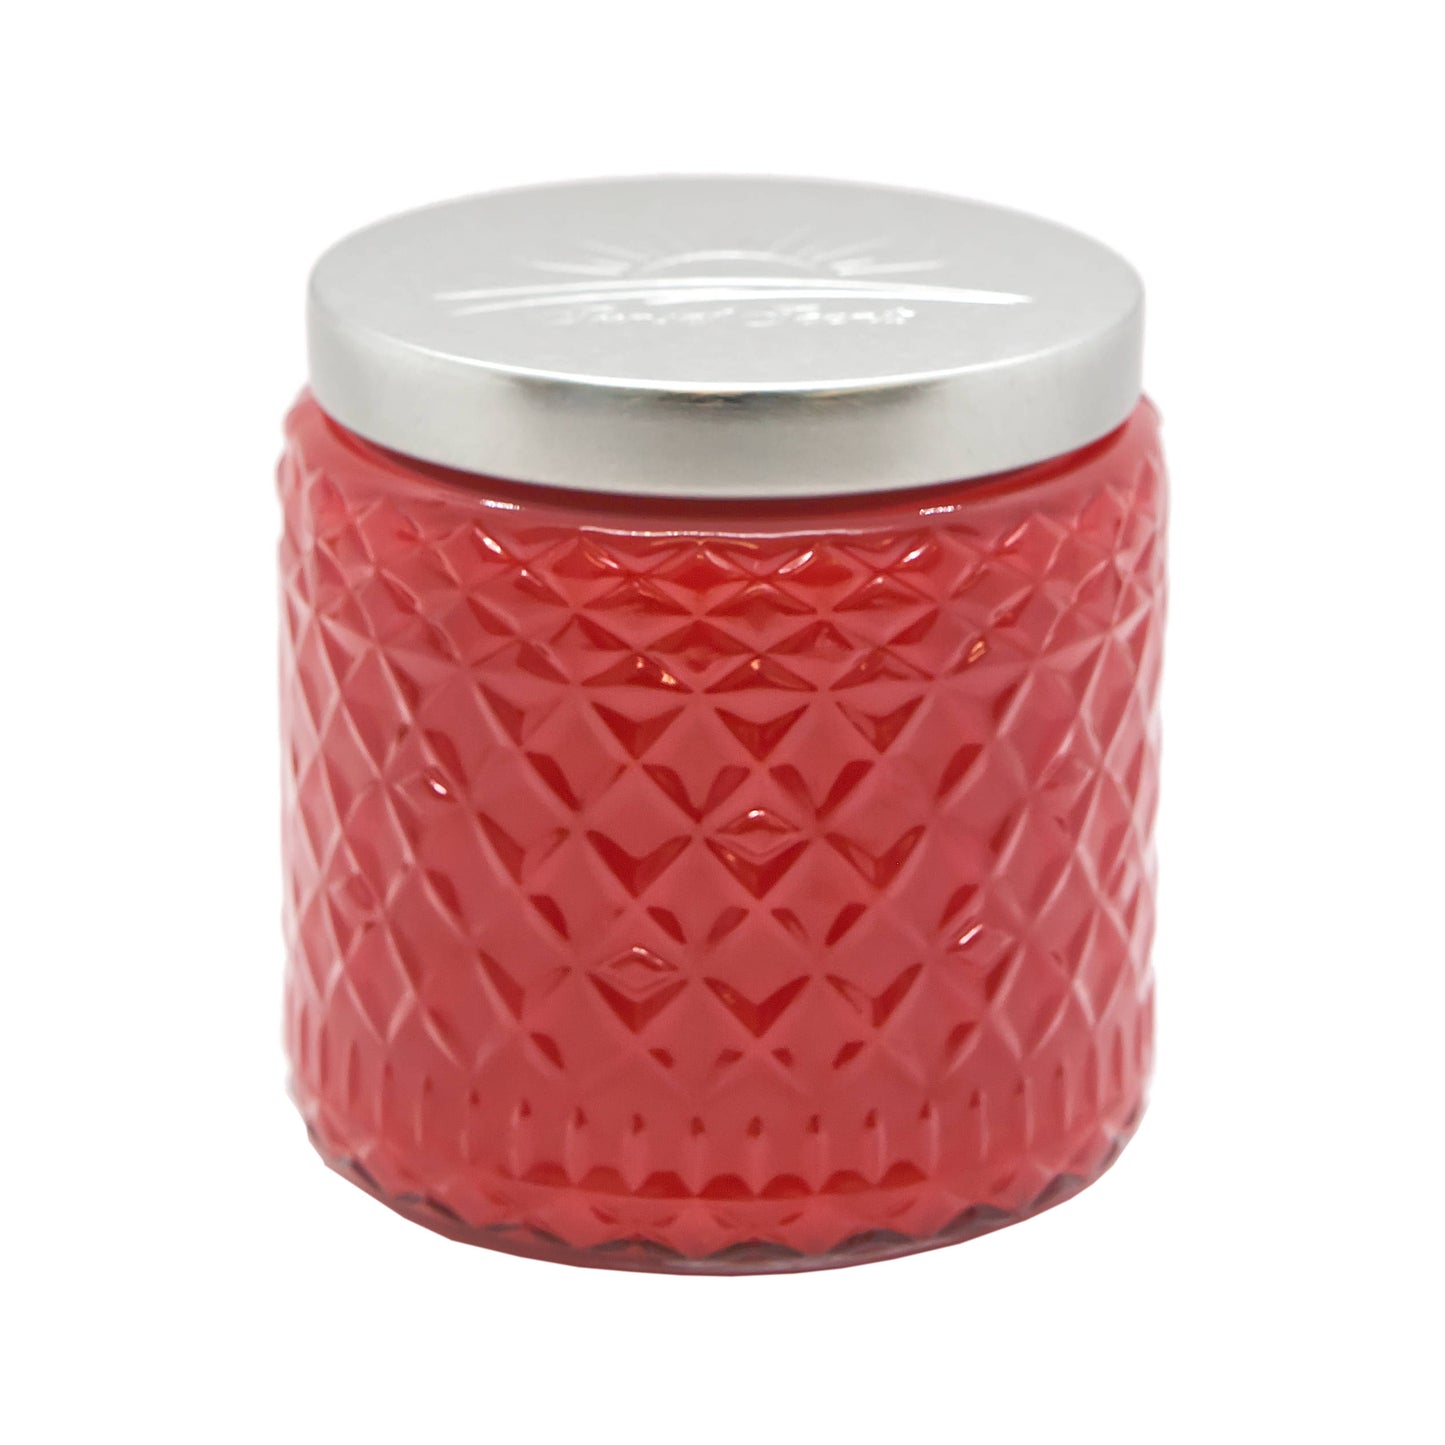 Juicy Watermelon Scented Candle - 16oz